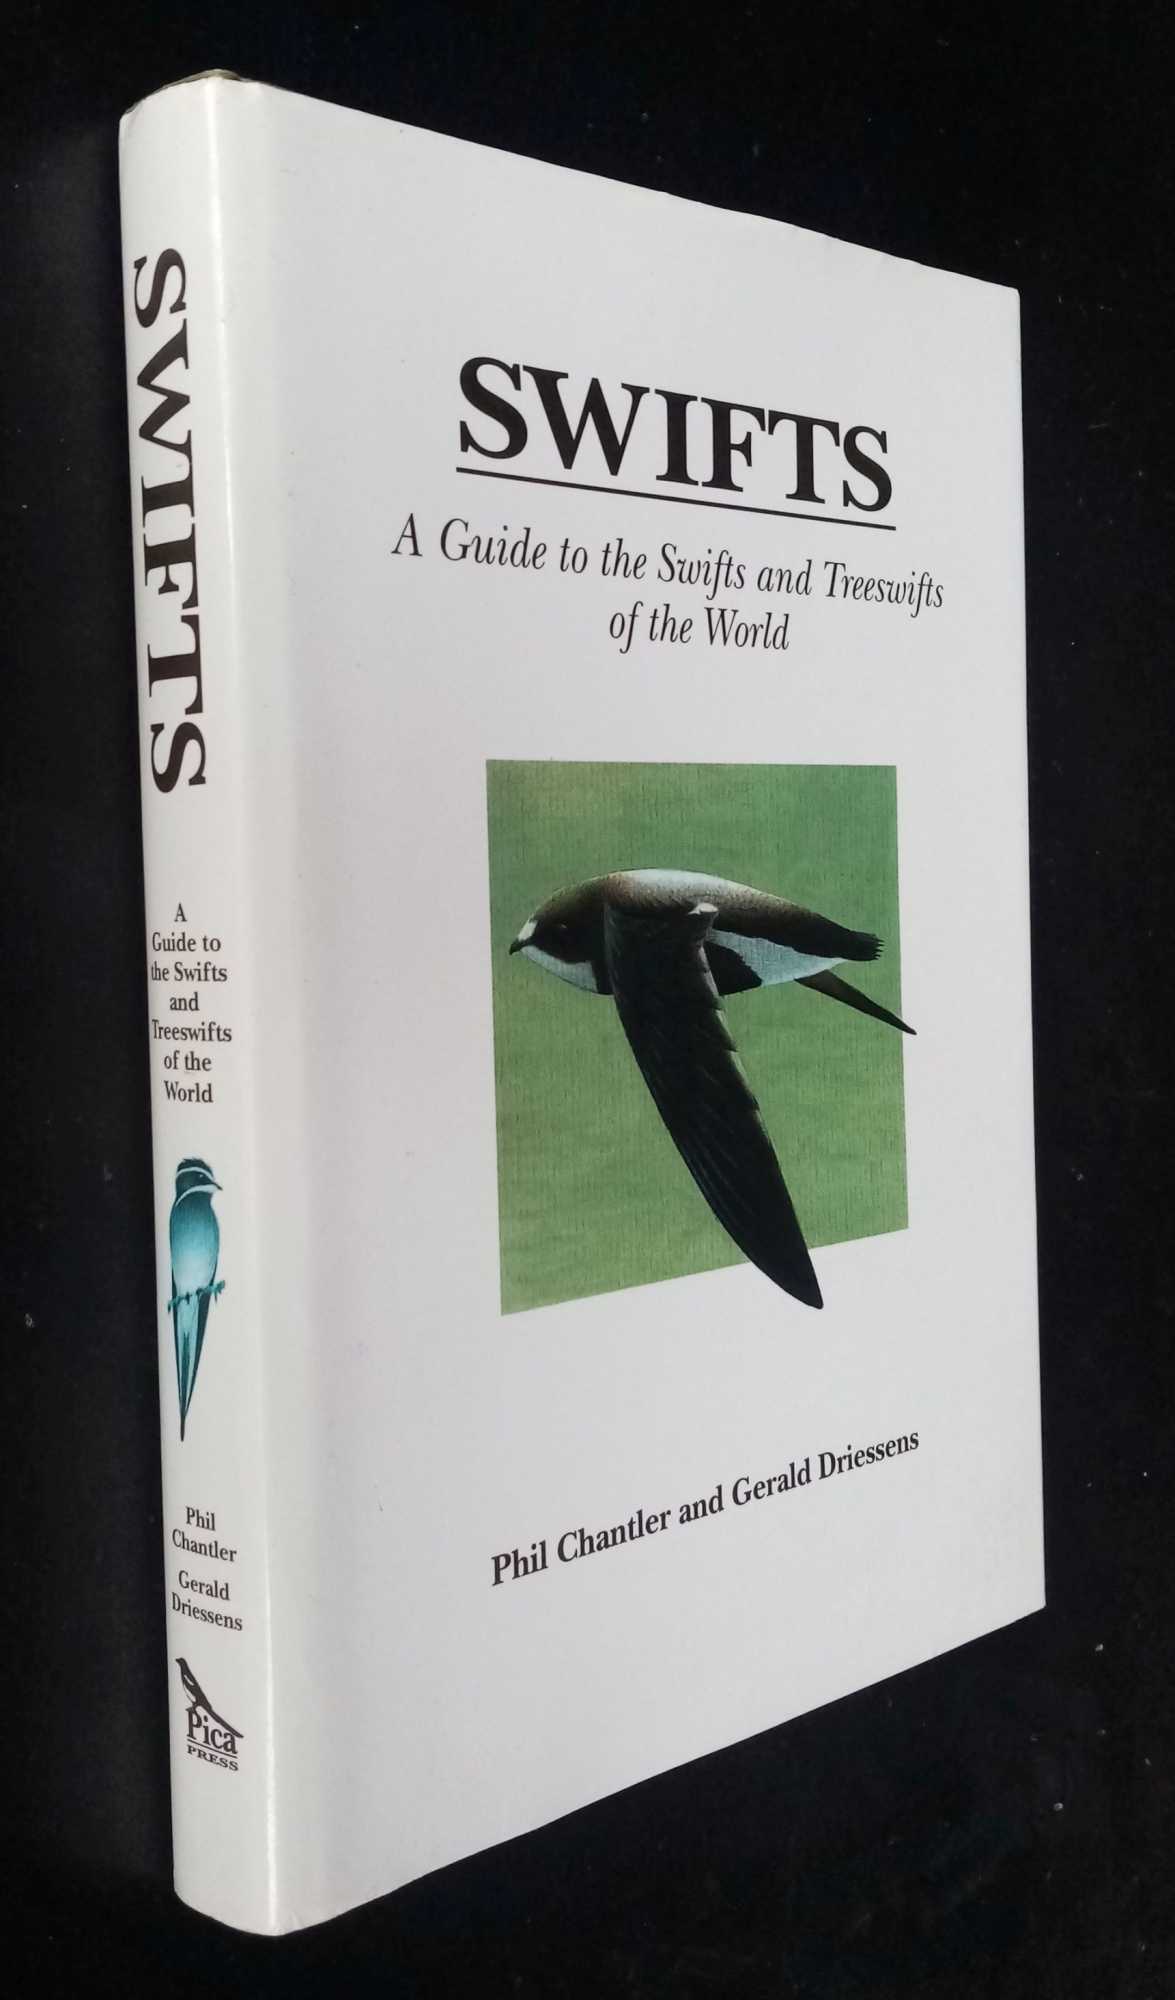 Phil Chantler, Gerald Driessens - Swifts. A Guide to the Swifts & Treeswifts of the World